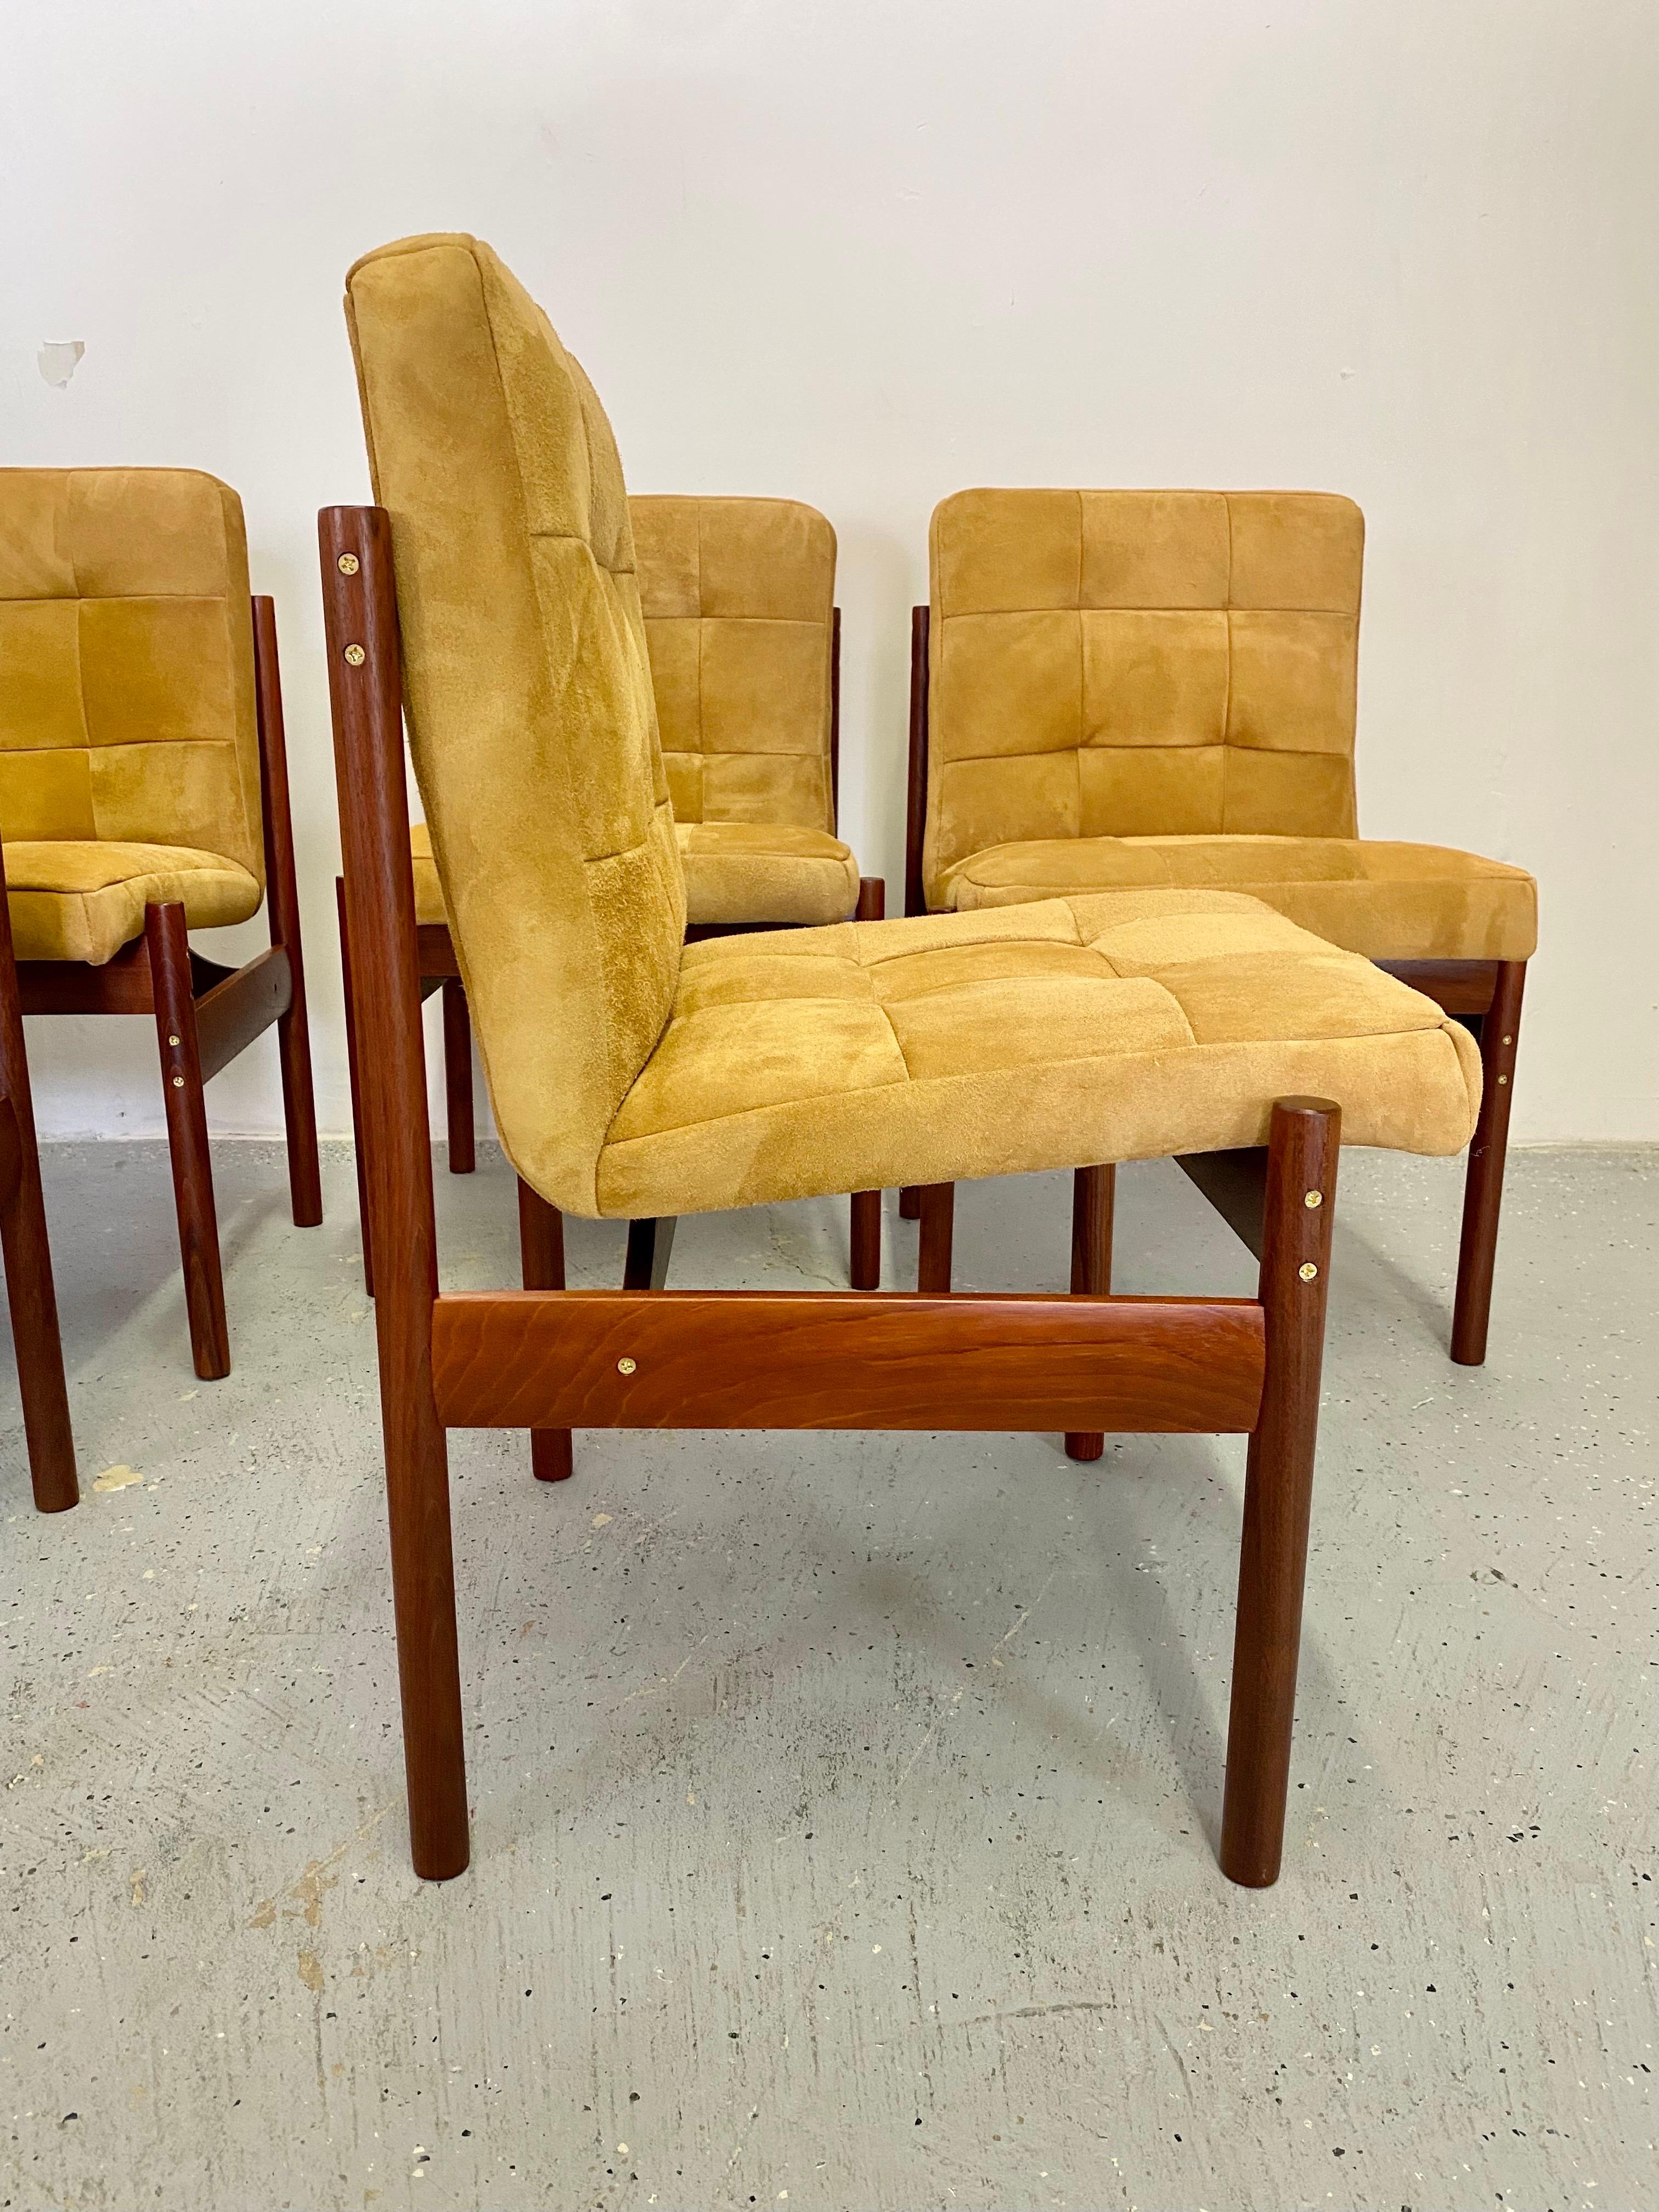 An incredible set of Brazilian dining chairs. The jacaranda rosewood frames have been fully restored with all new hardware installed. These feature rich grained rosewood with exposed brass hardware and newly upholstered suede seats. A striking set